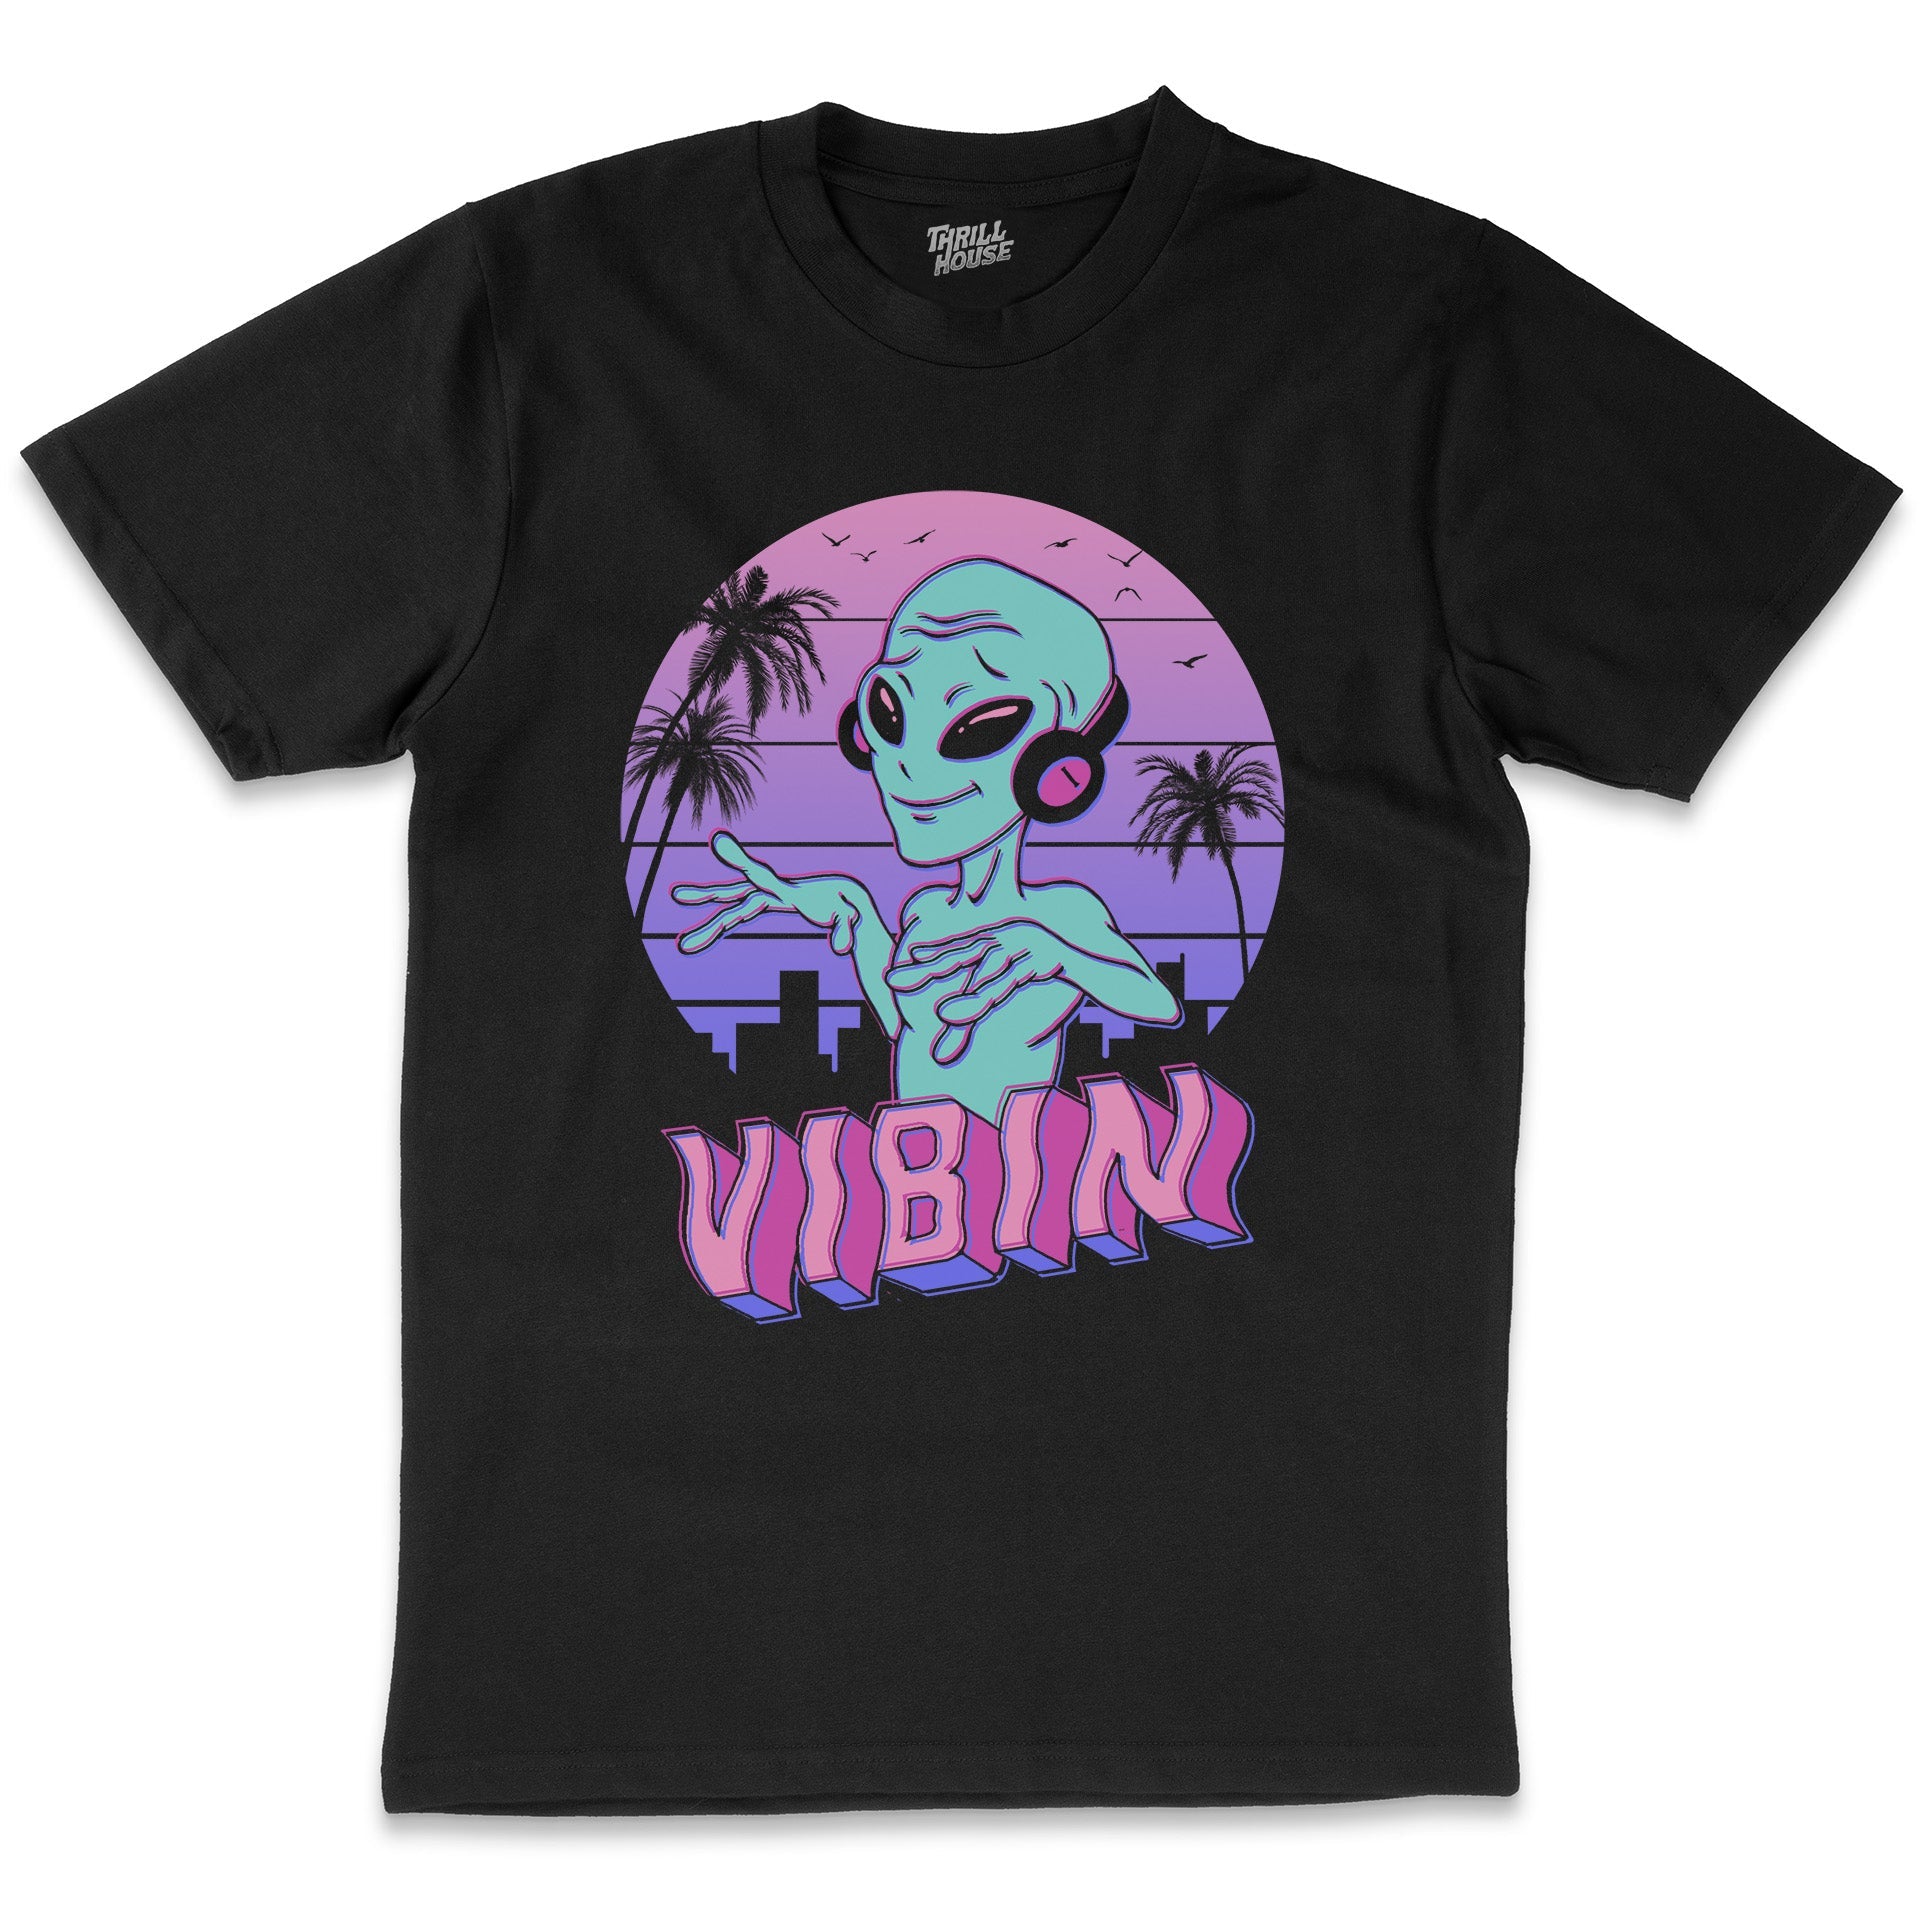 Alien Vibes Funny Cool Sci-Fi Space Vaporwave 80s Retro Vibe Extra Terrestrial Cotton T-Shirt